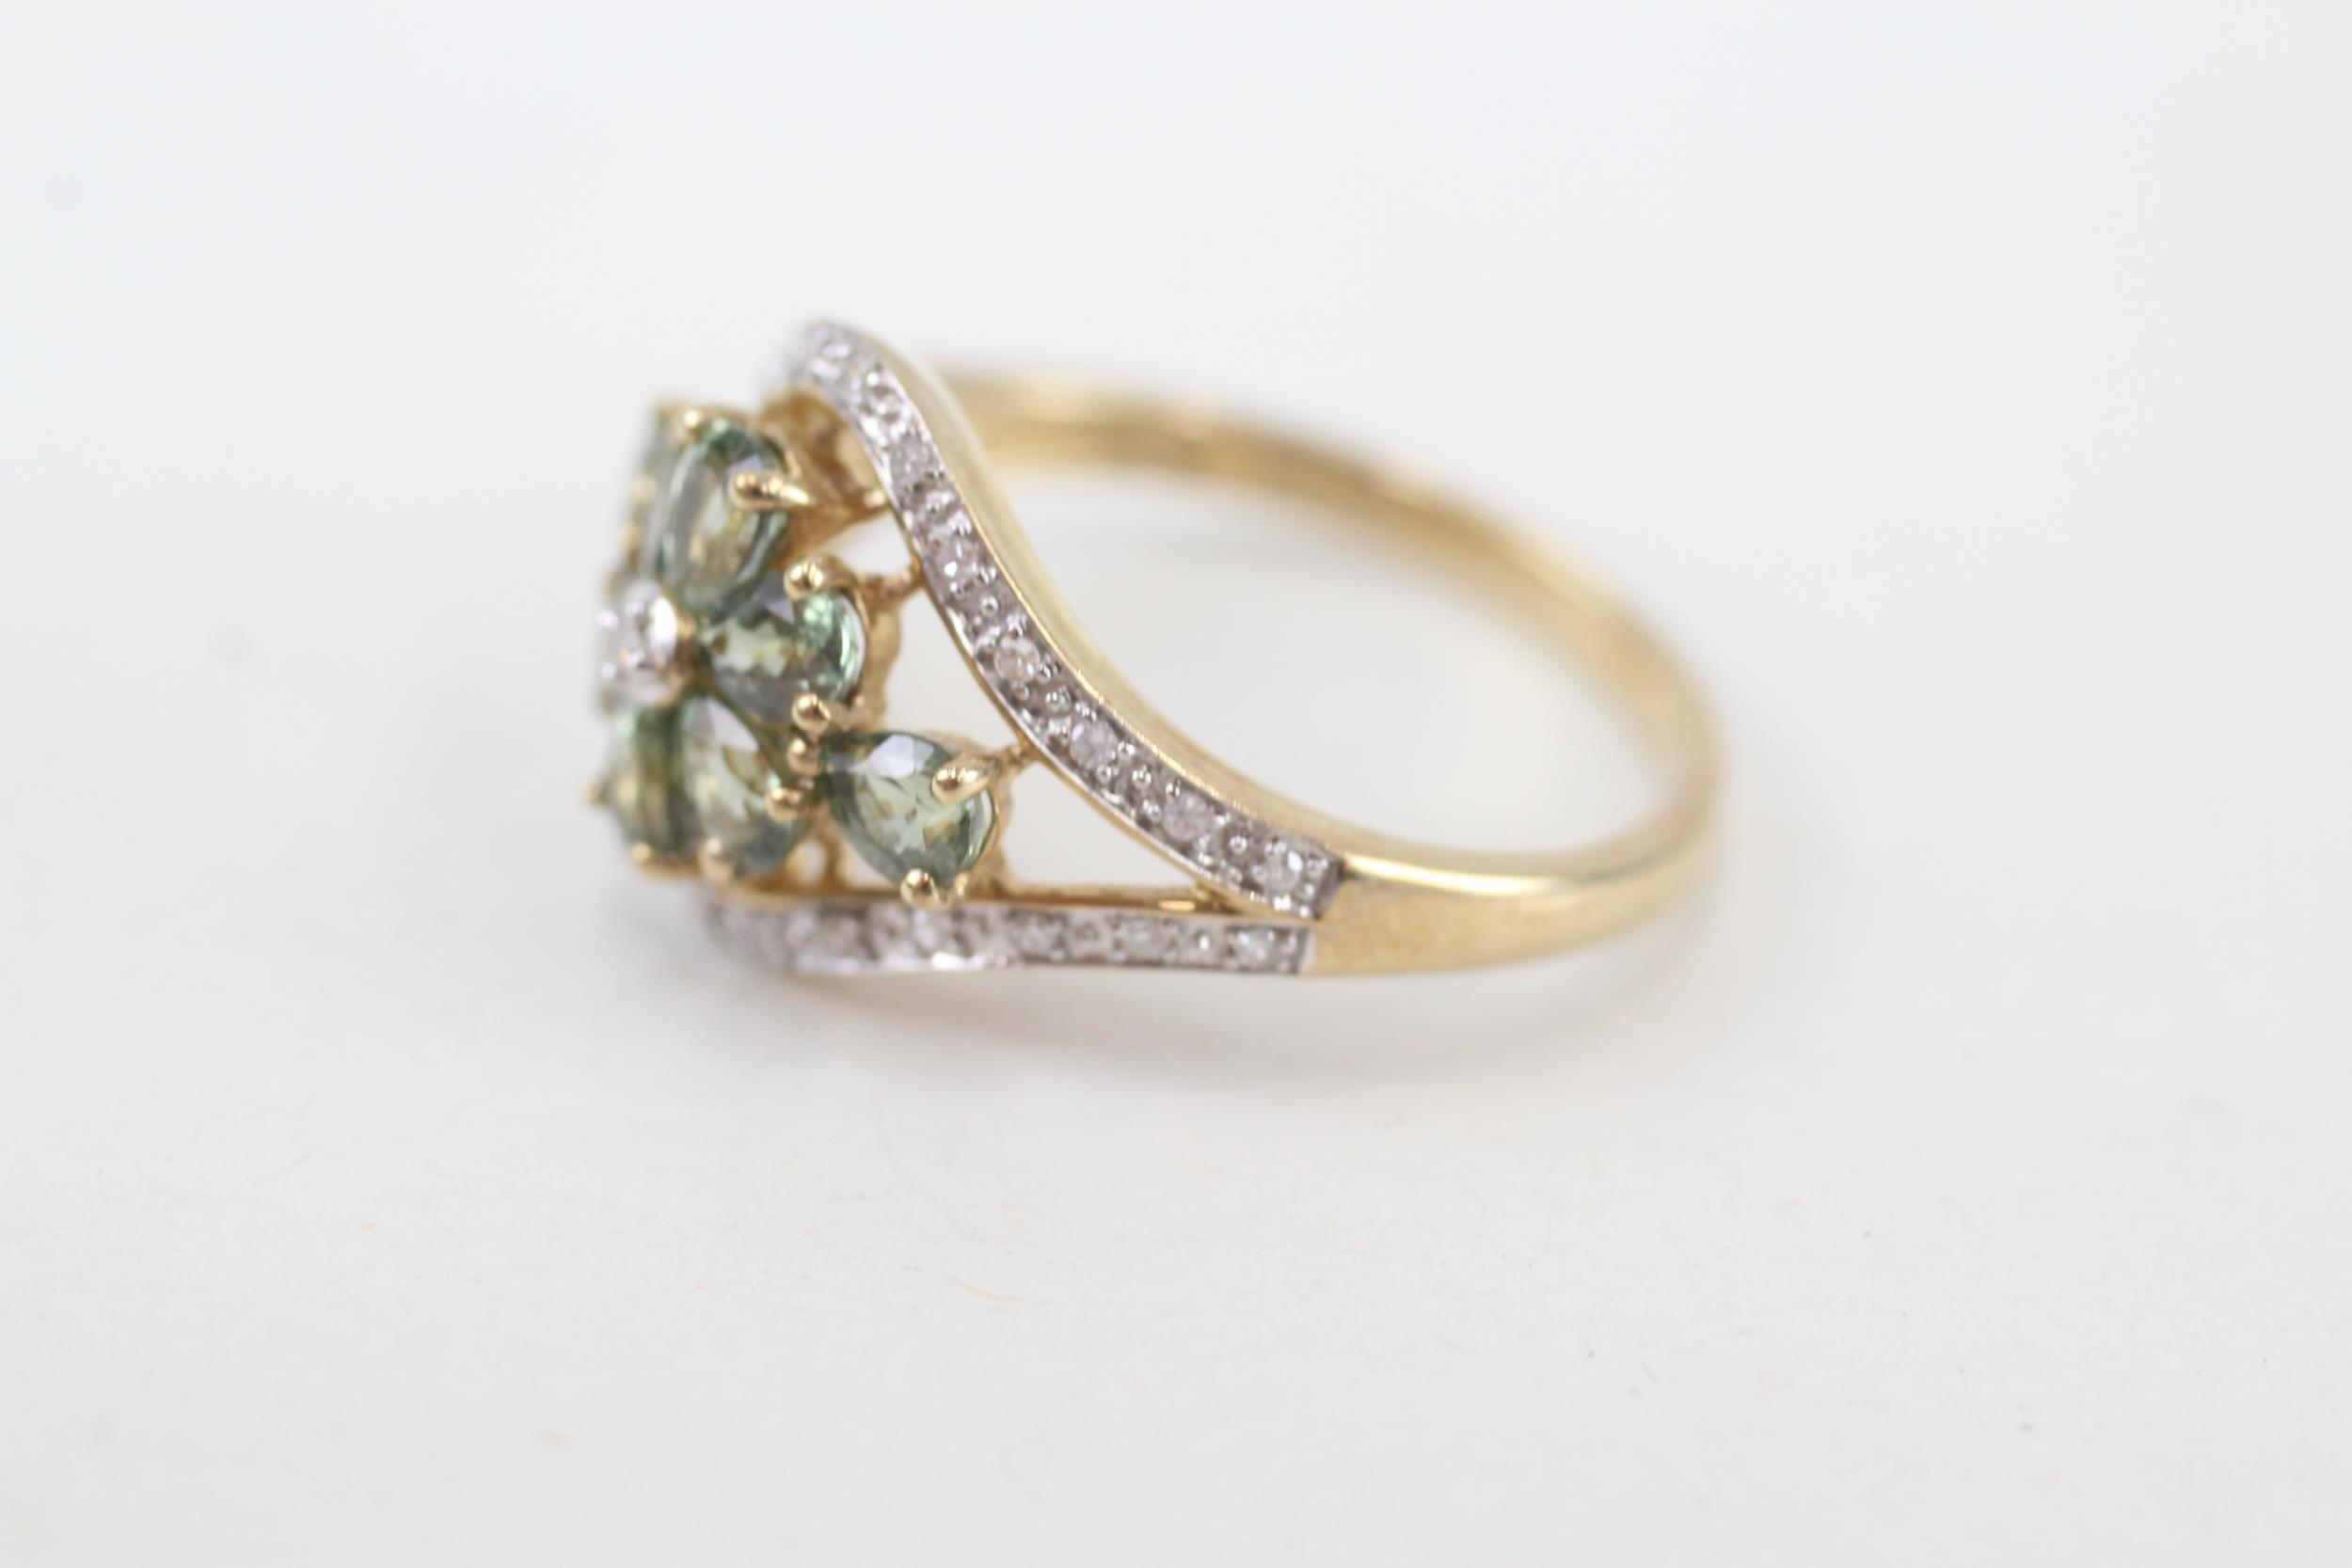 9ct gold green gemstone floral cluster ring with diamond frame (2.9g) Size P - Image 3 of 4